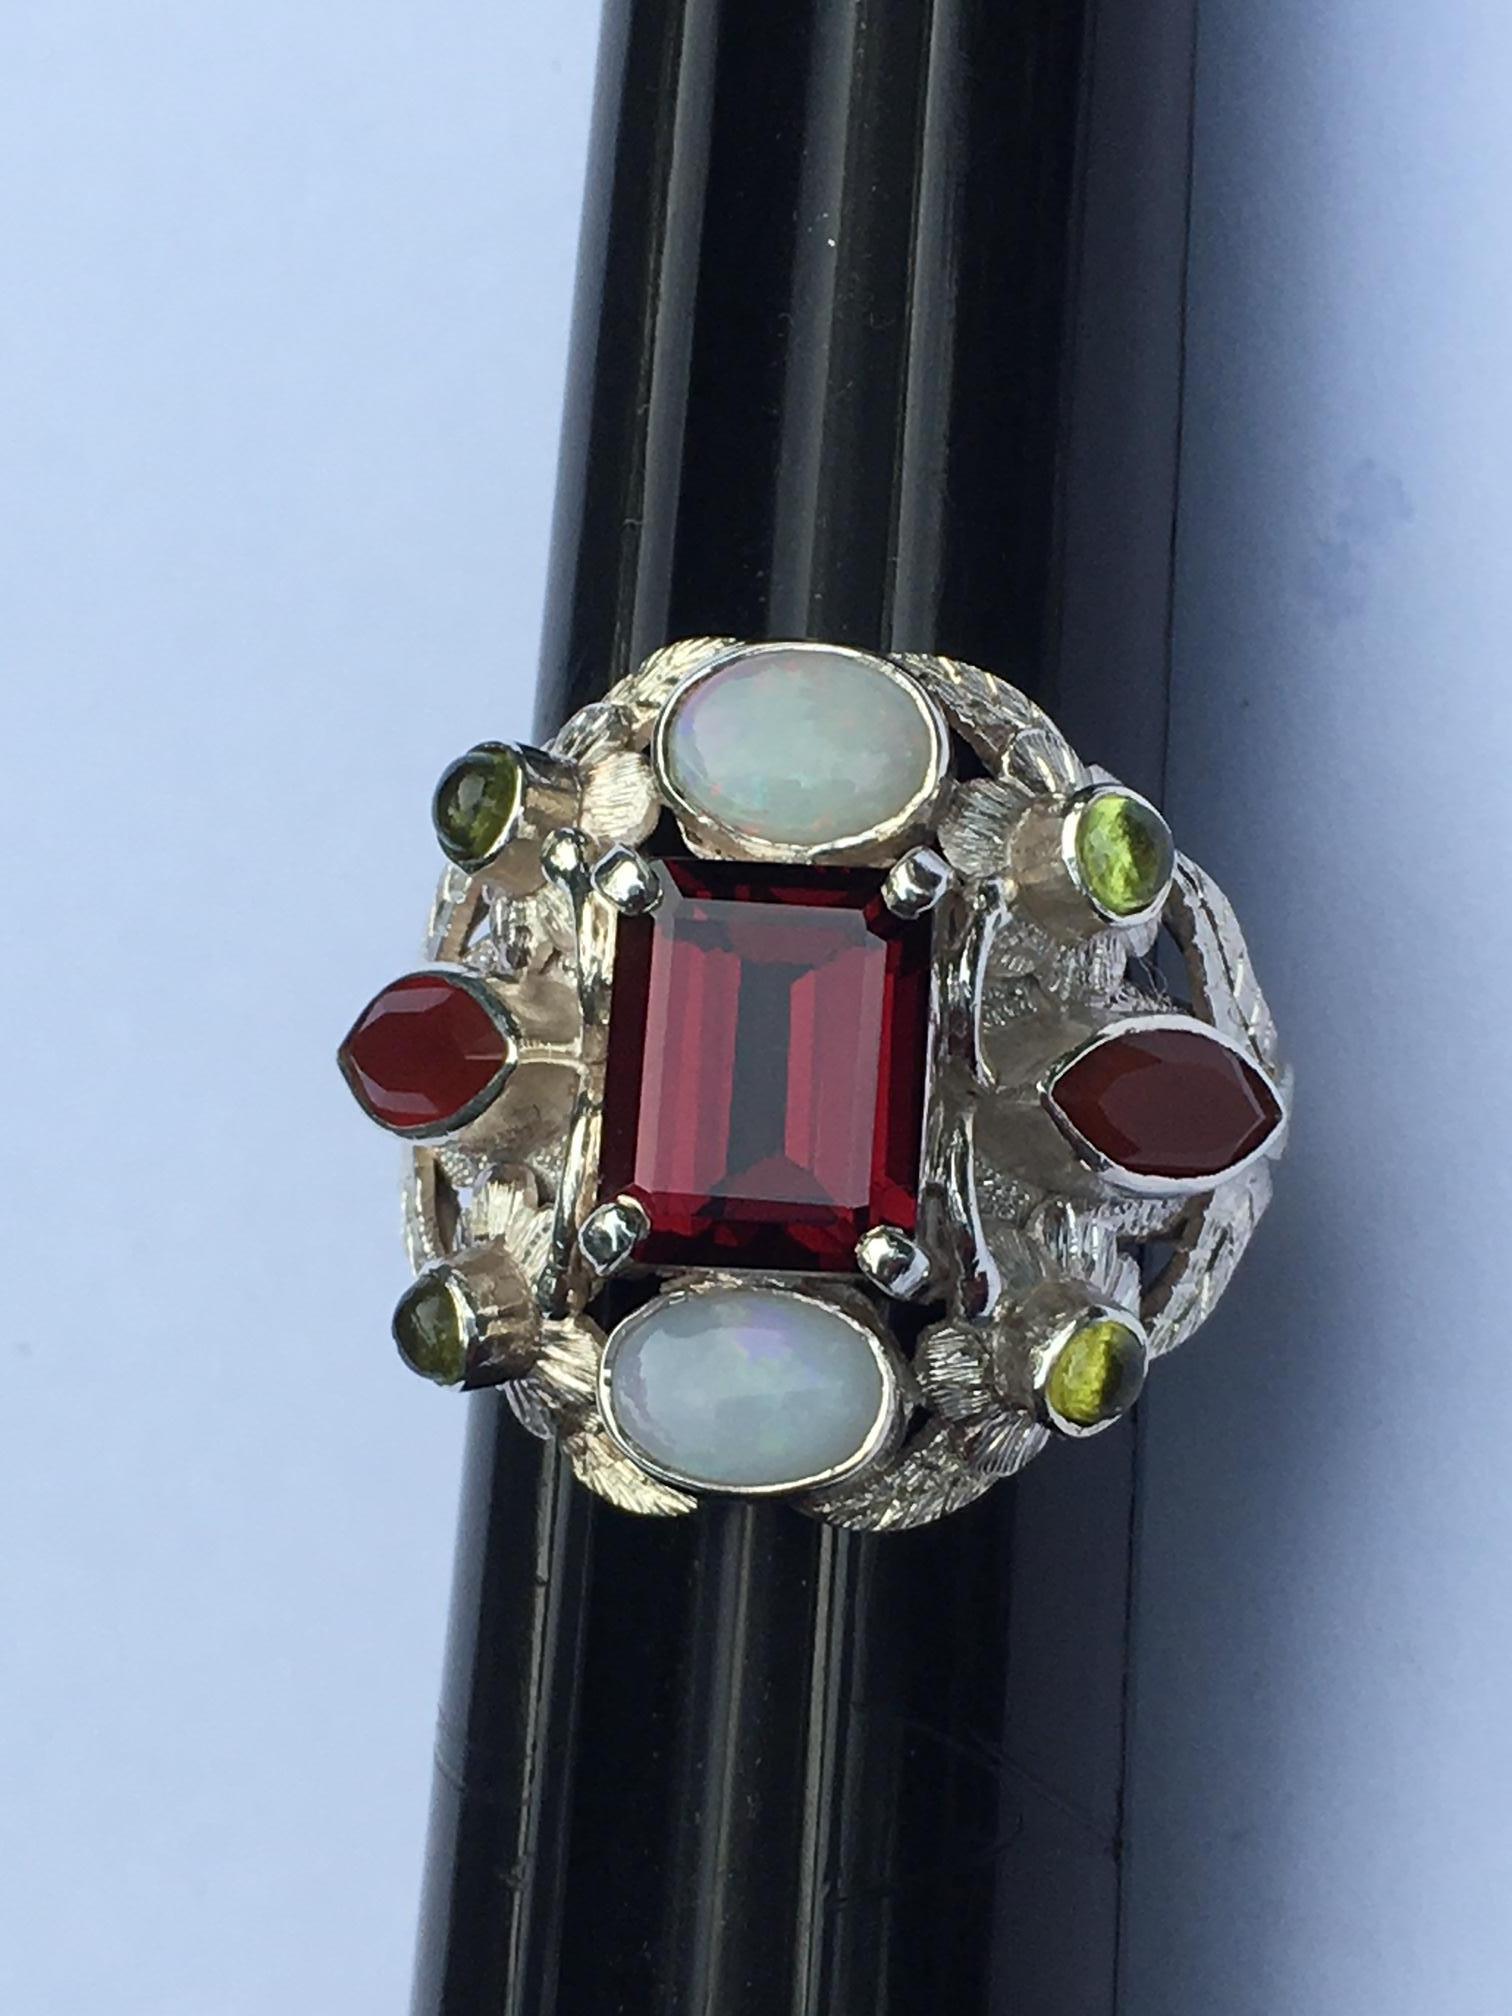 This ring is not just a ring its piece of art. Center red stone is  7 X 9 MM very clean Garnet, 6 X 8 MM oval Opal, 3 X 6 MM Marquise Carnelian and 2 MM Round  cab Peridot.
This ring is created by very skilled gold and silver smith named. R.Rasile